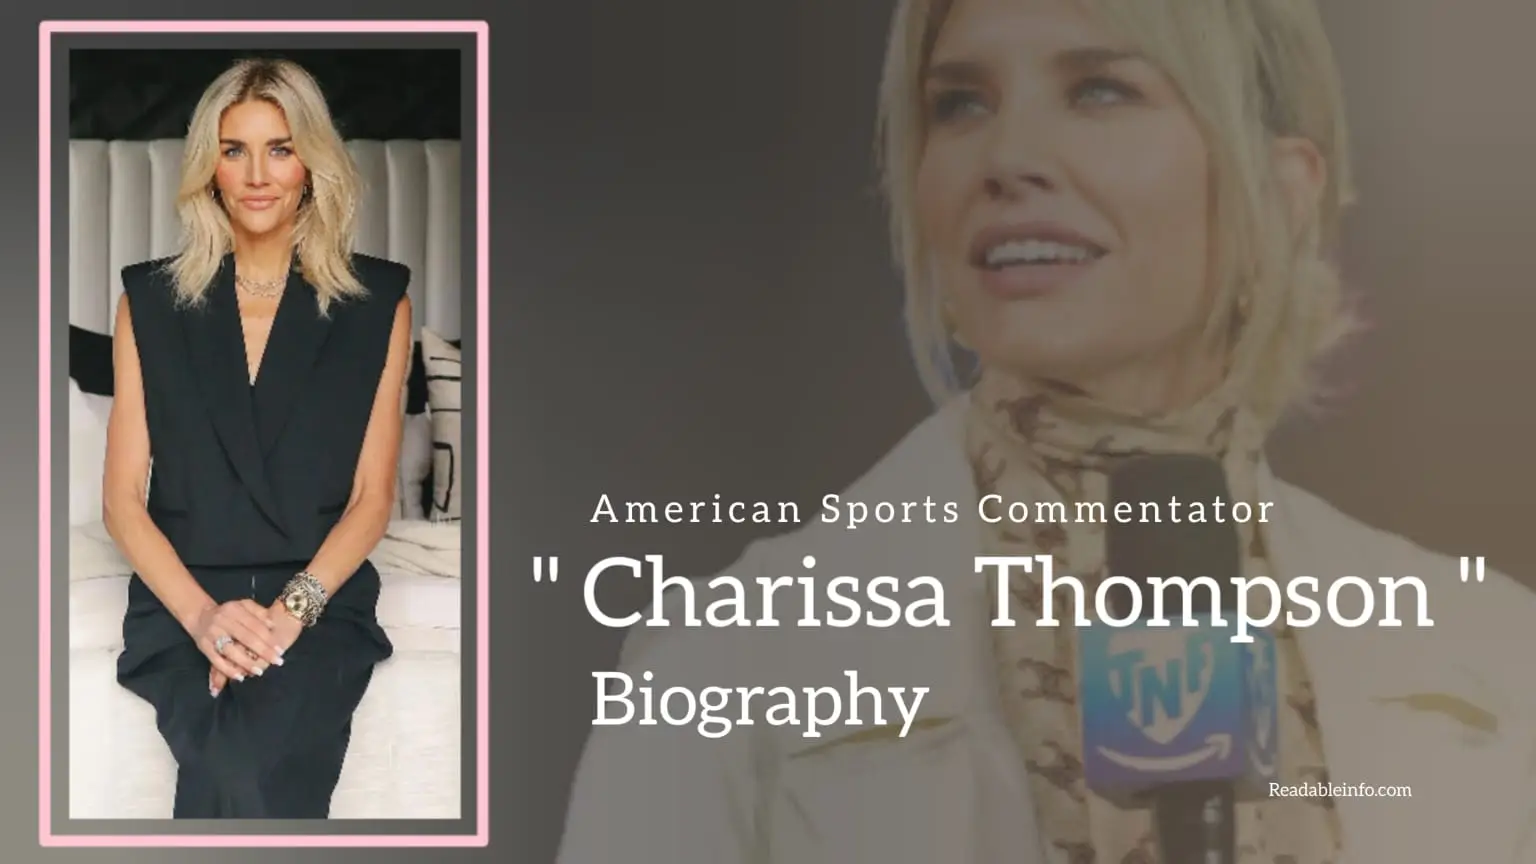 You are currently viewing Charissa Thompson Biography (American Sports Commentator)